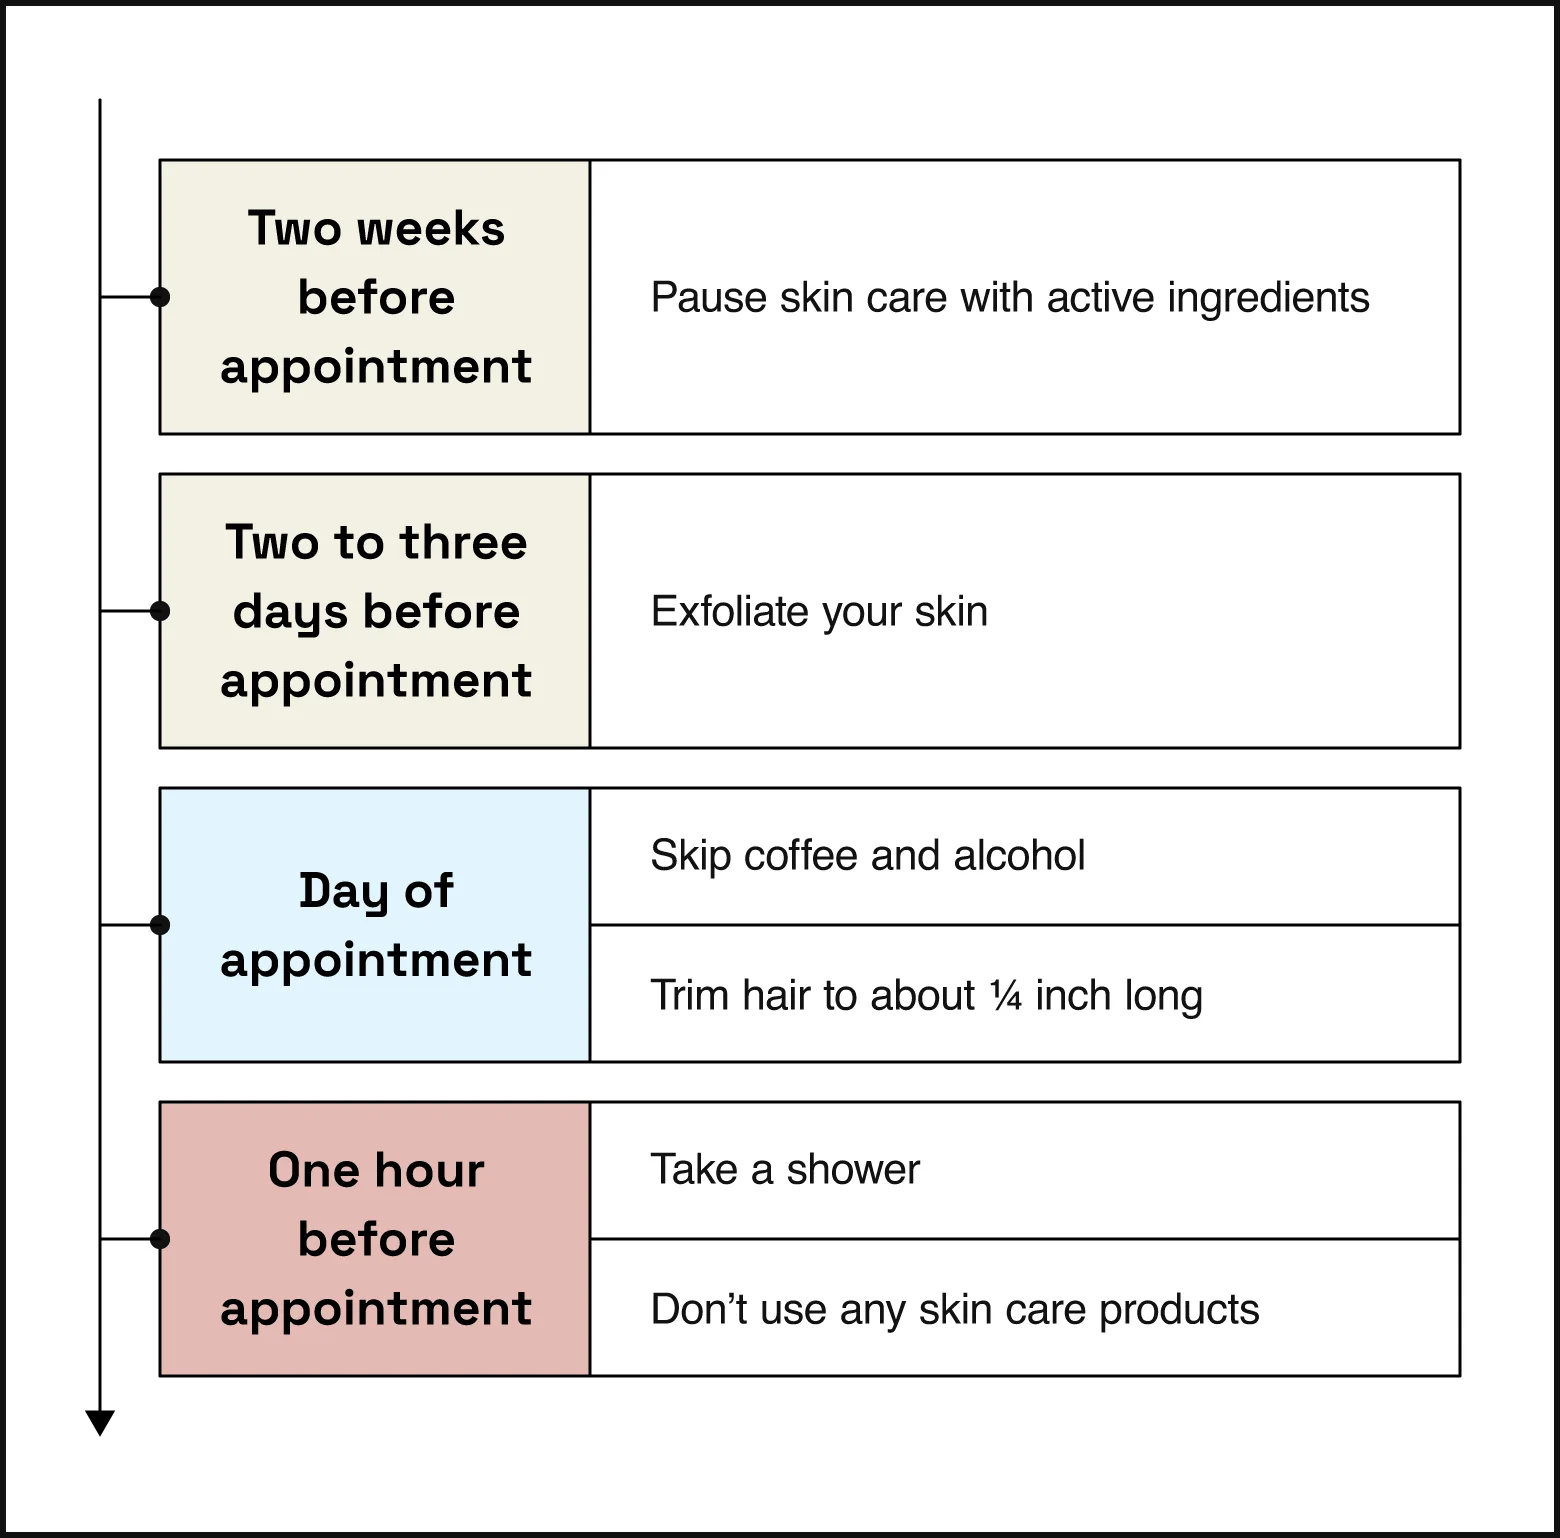 Image of timeline showing that you should pause skincare with active ingredients; two to three days before you should exfoliate; the day of you should skip coffee, skip alcohol, and trim hair; and one hour before you should take a shower without skincare products.